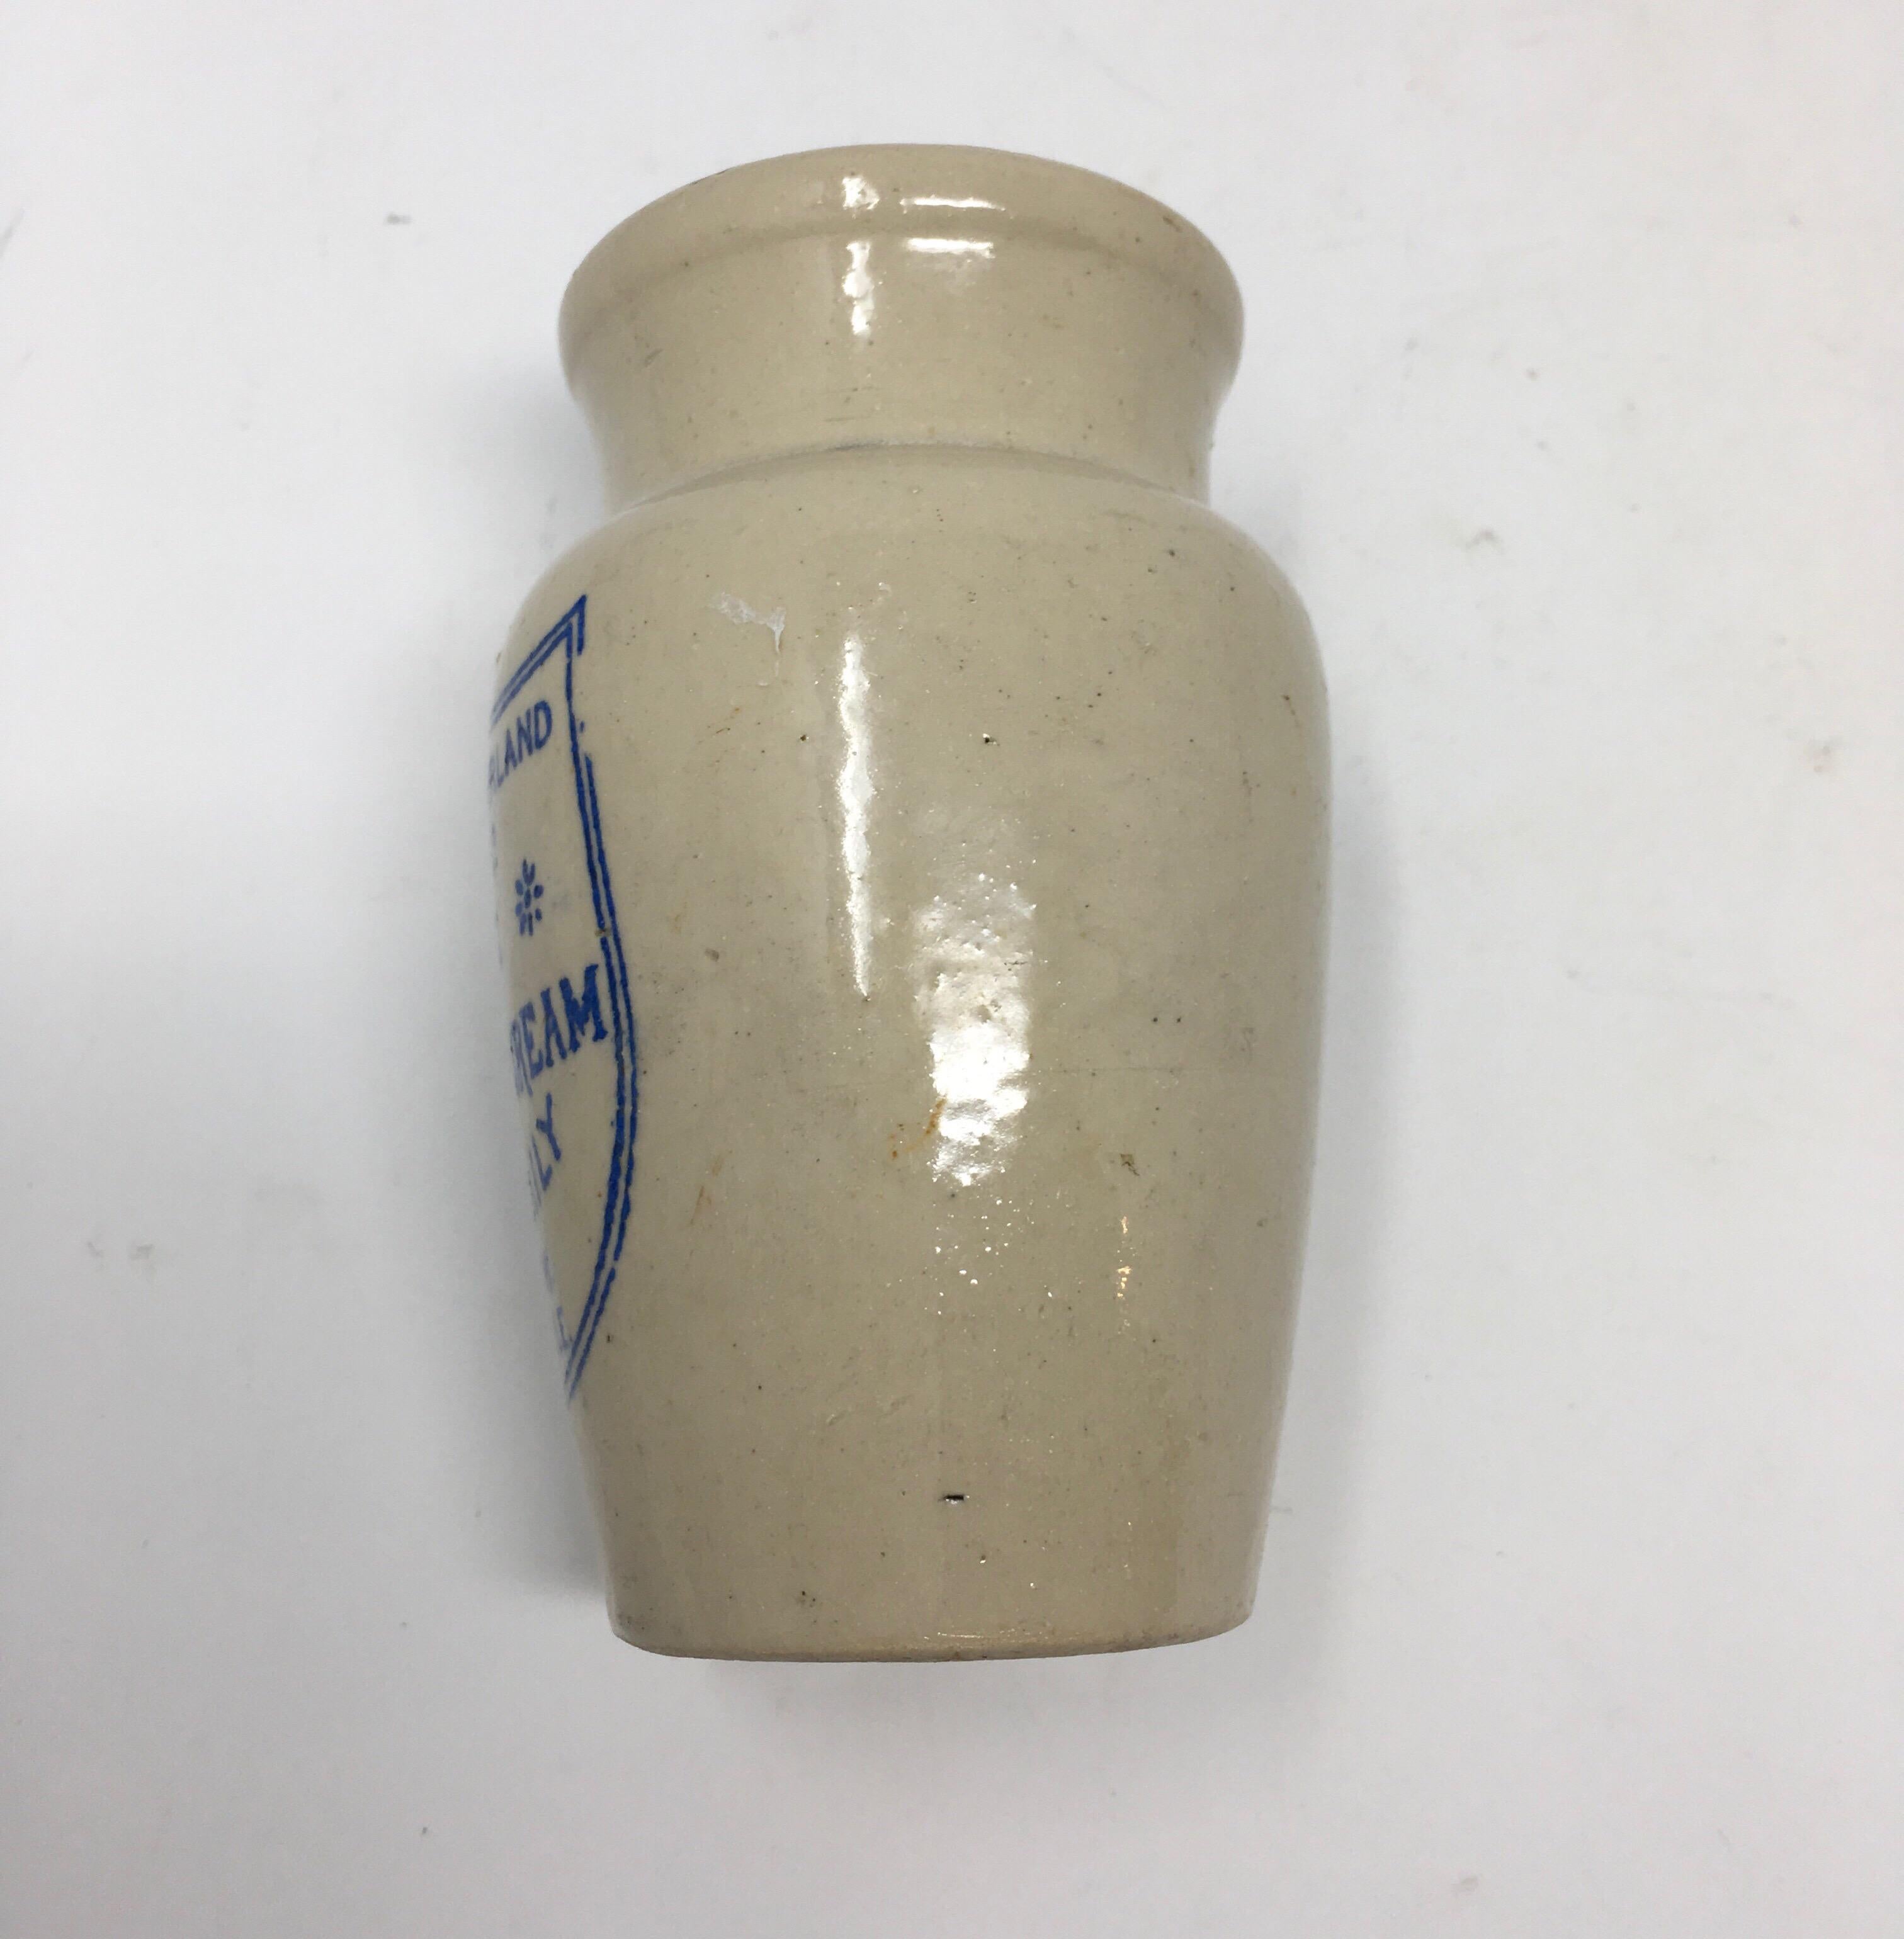 From Northwest England, this blue print pure thick cream pot from Cumberland is approximate 4.25 inches high and in good clean condition. The decorative pot is printed on the front in blue lettering under the glaze and has the company's logo, a